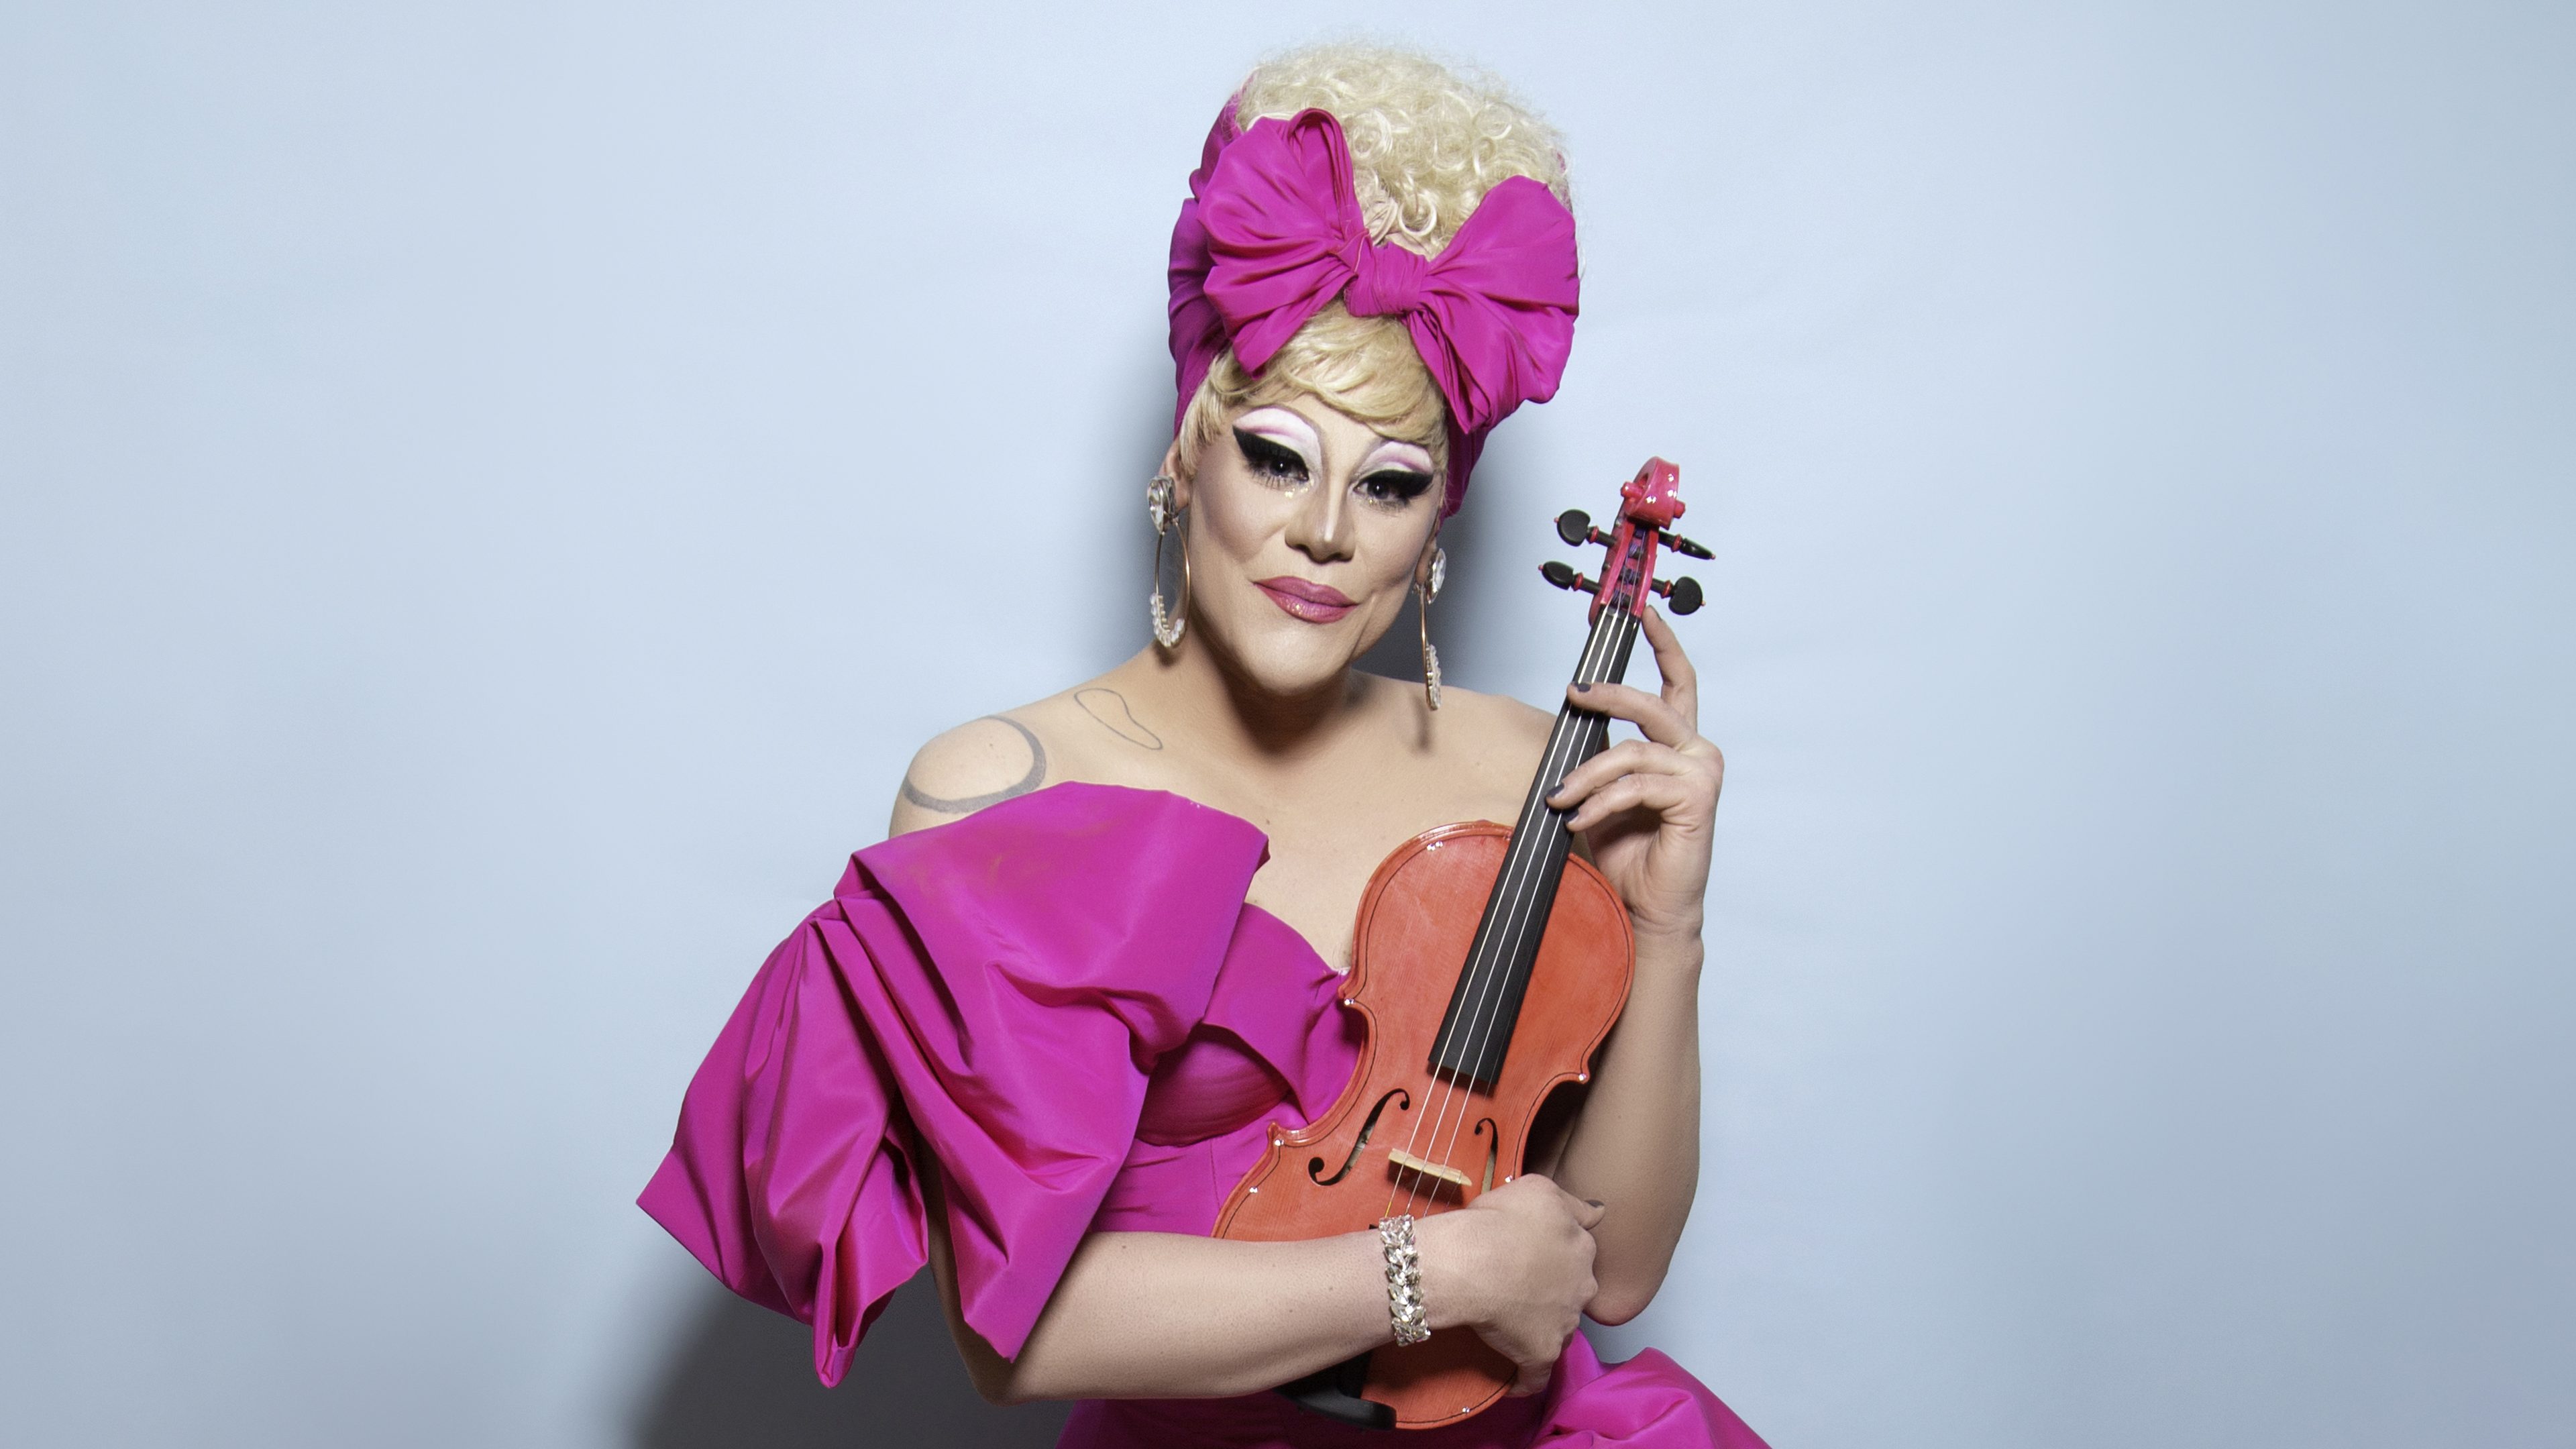 Star of RuPaul's Drag Race Thorgy Thor in a pink dress holding her violin